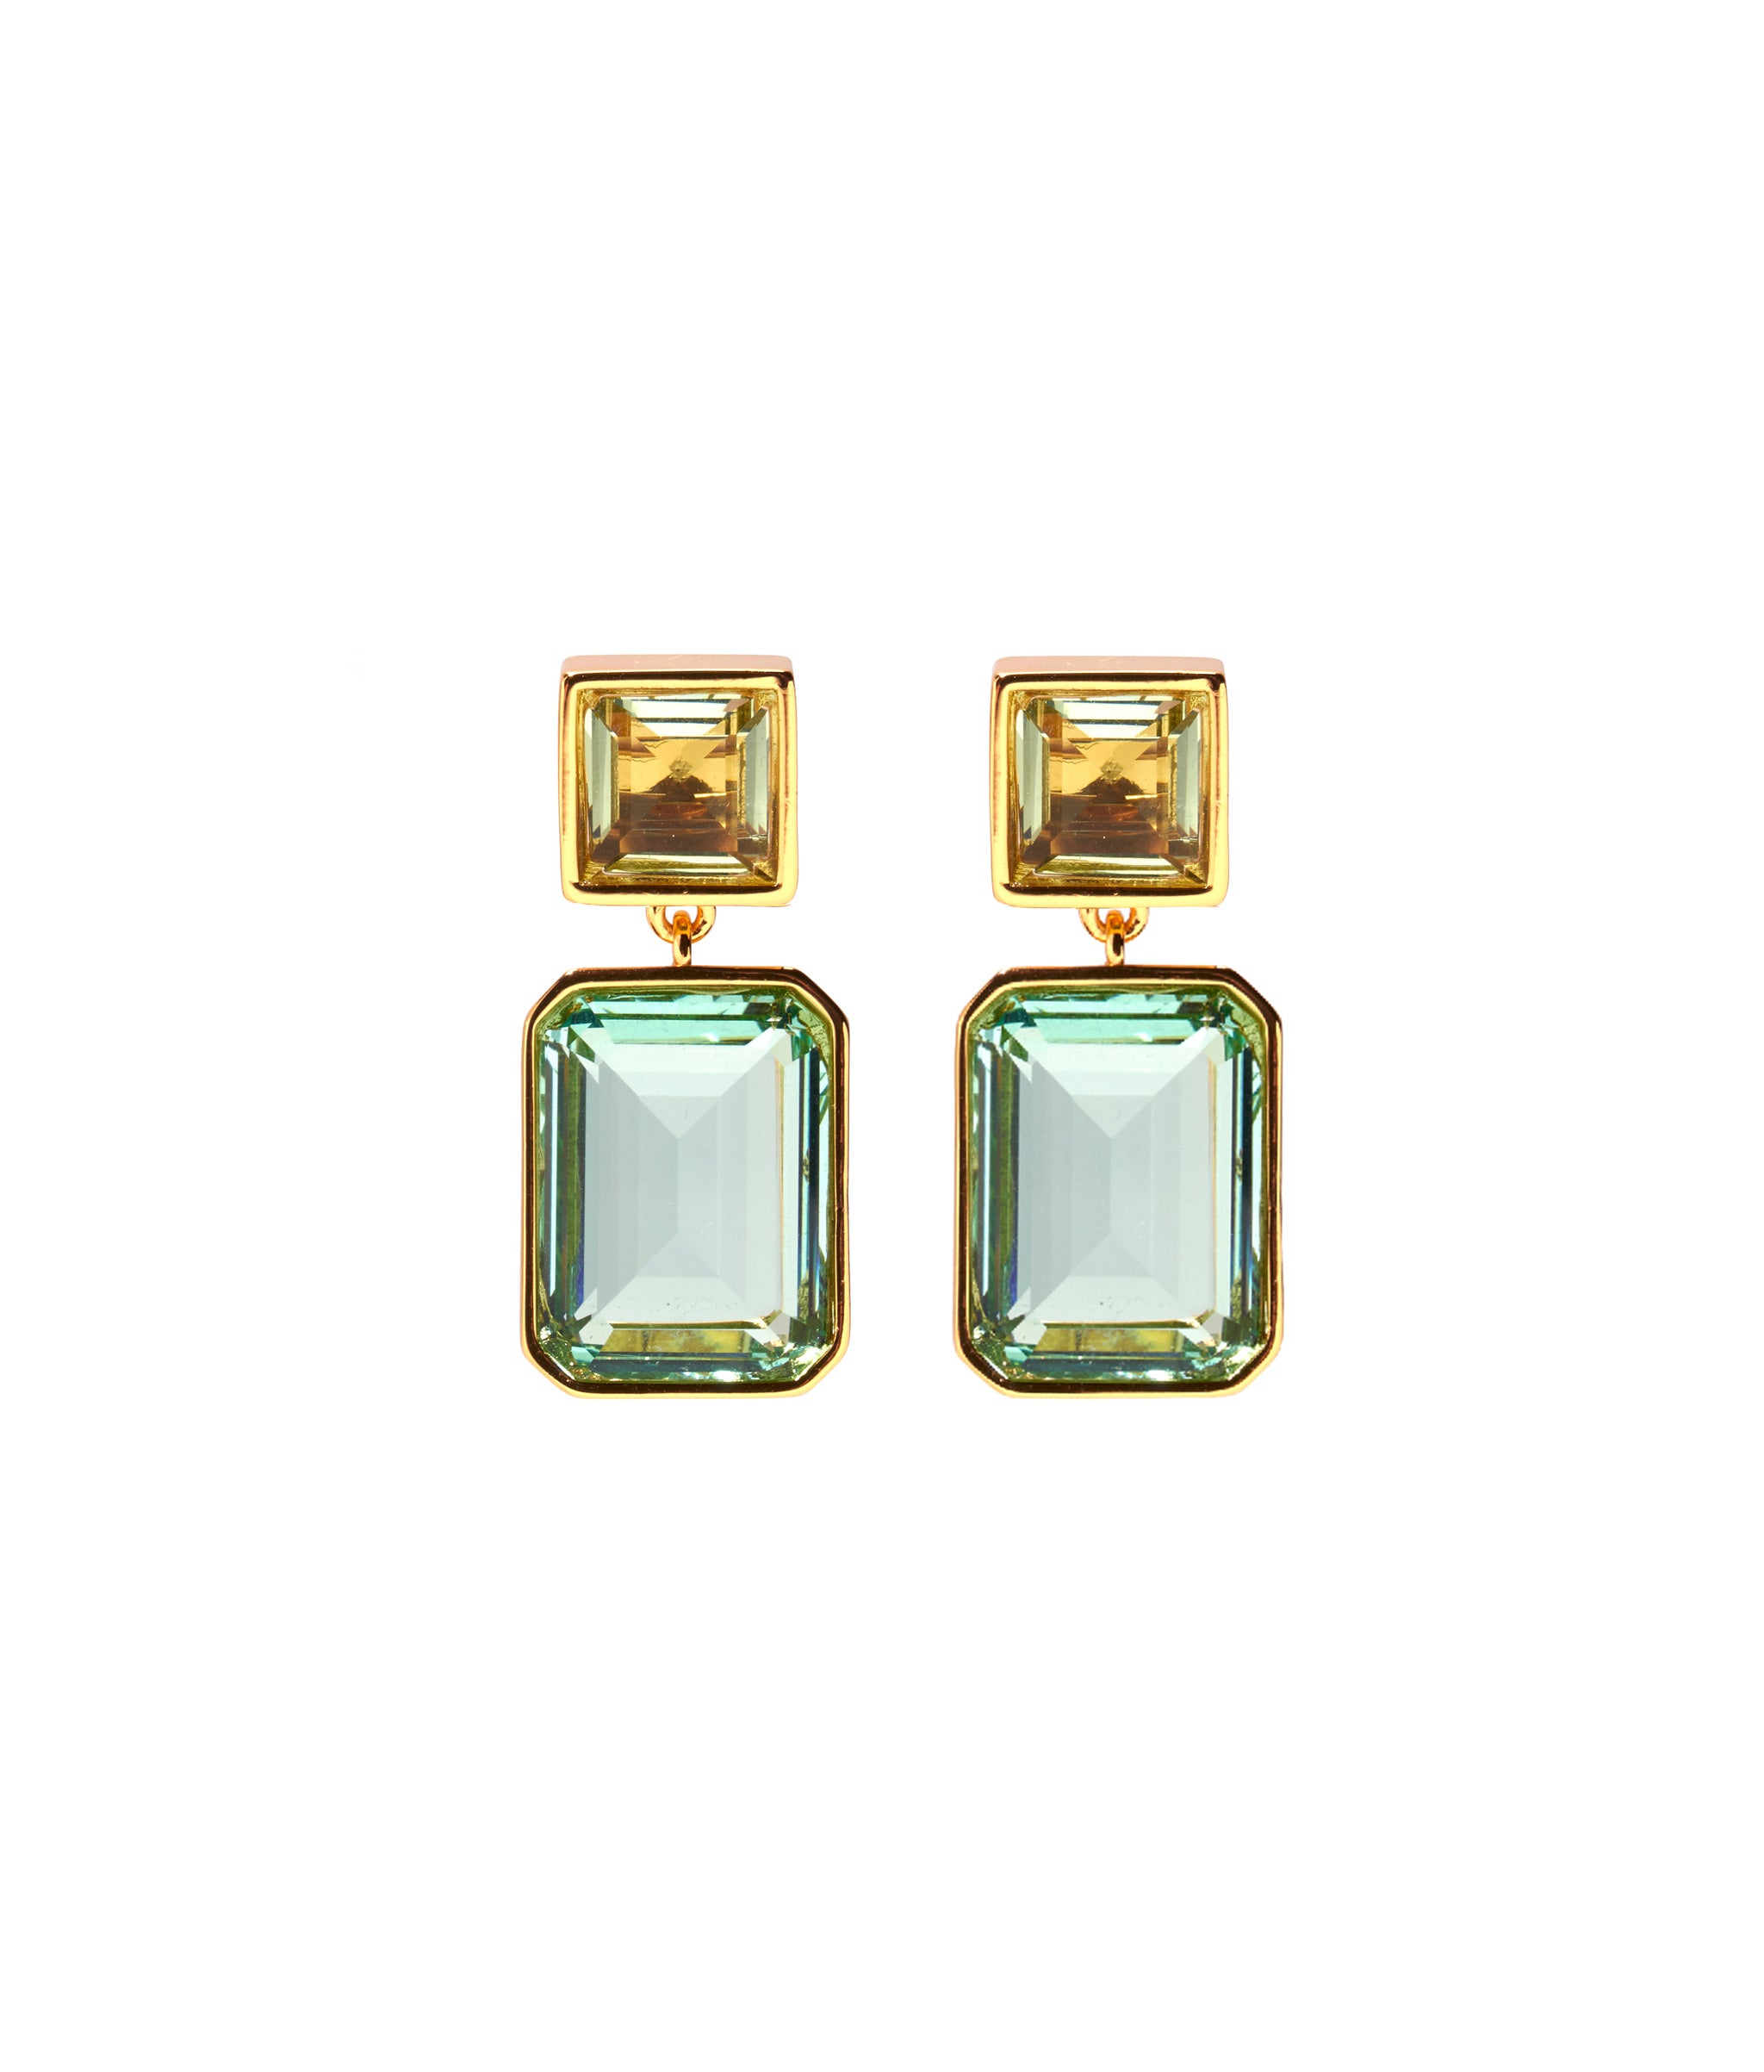 Lush Earrings in Atlantis. Gold-plated brass earrings with light green glass tops and ocean blue glass baguette drops.